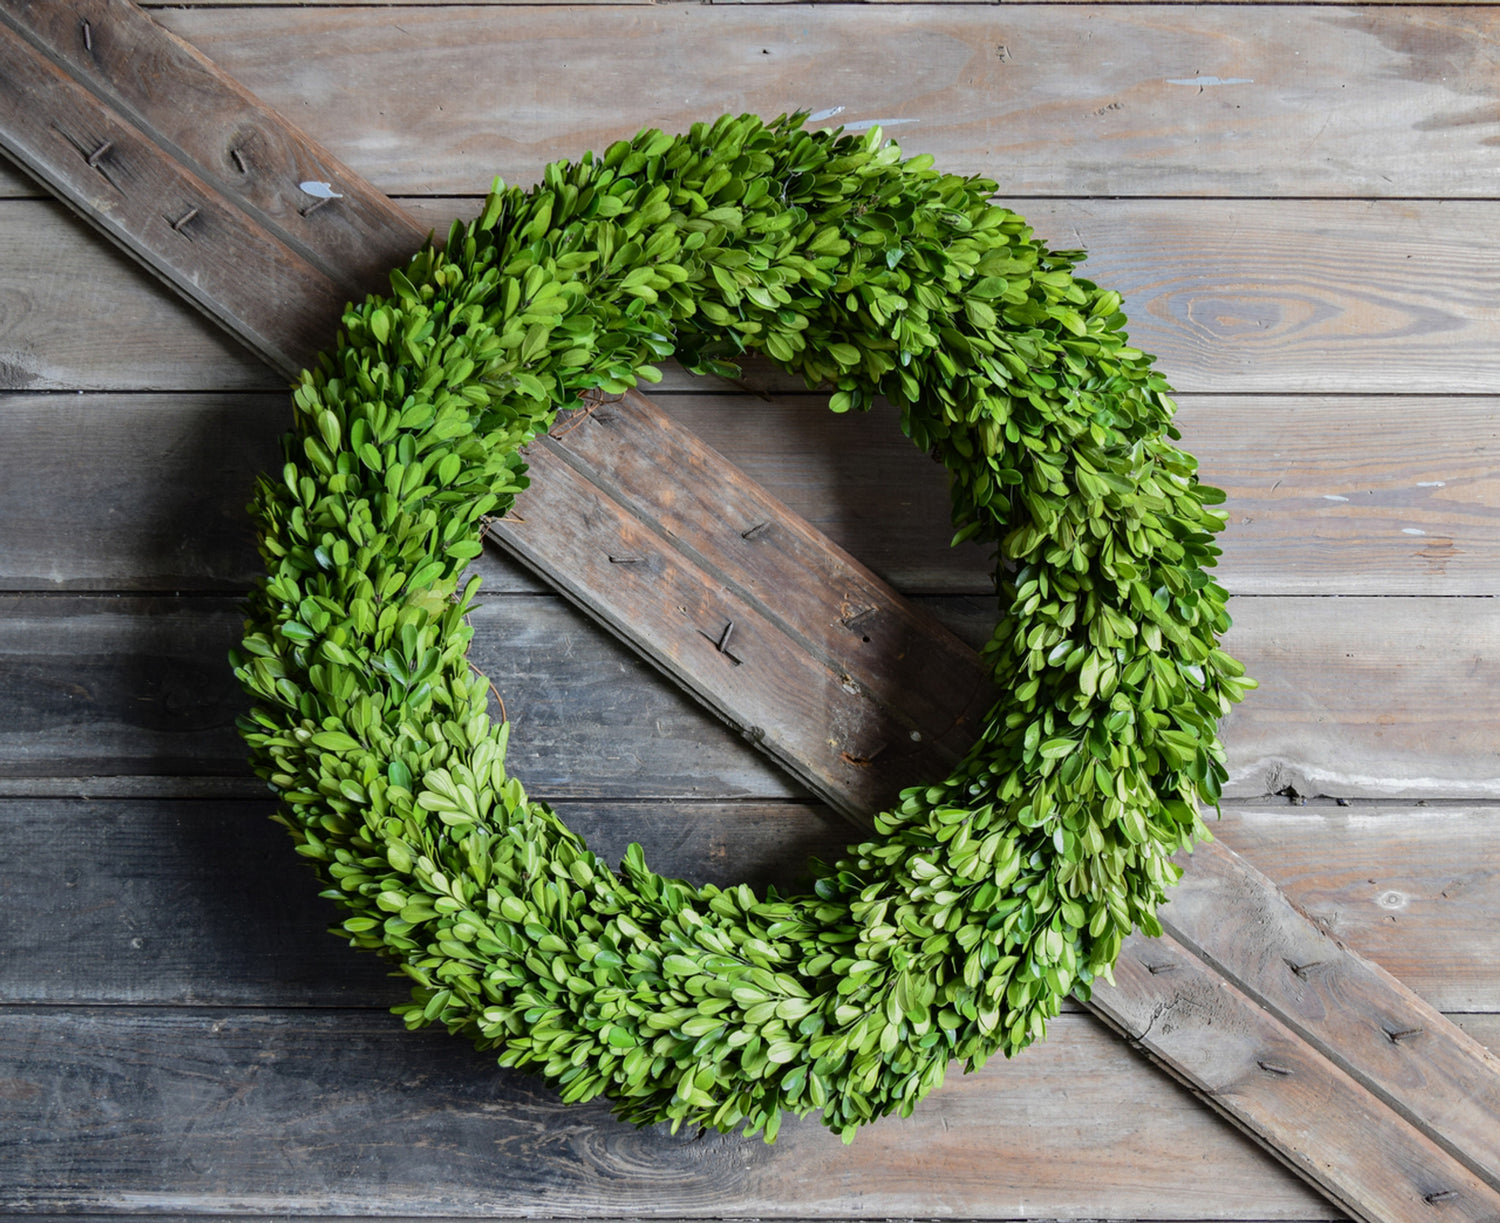 A Mills Floral Company Preserved Boxwood Country Manor Wreath is hanging on a wooden wall.